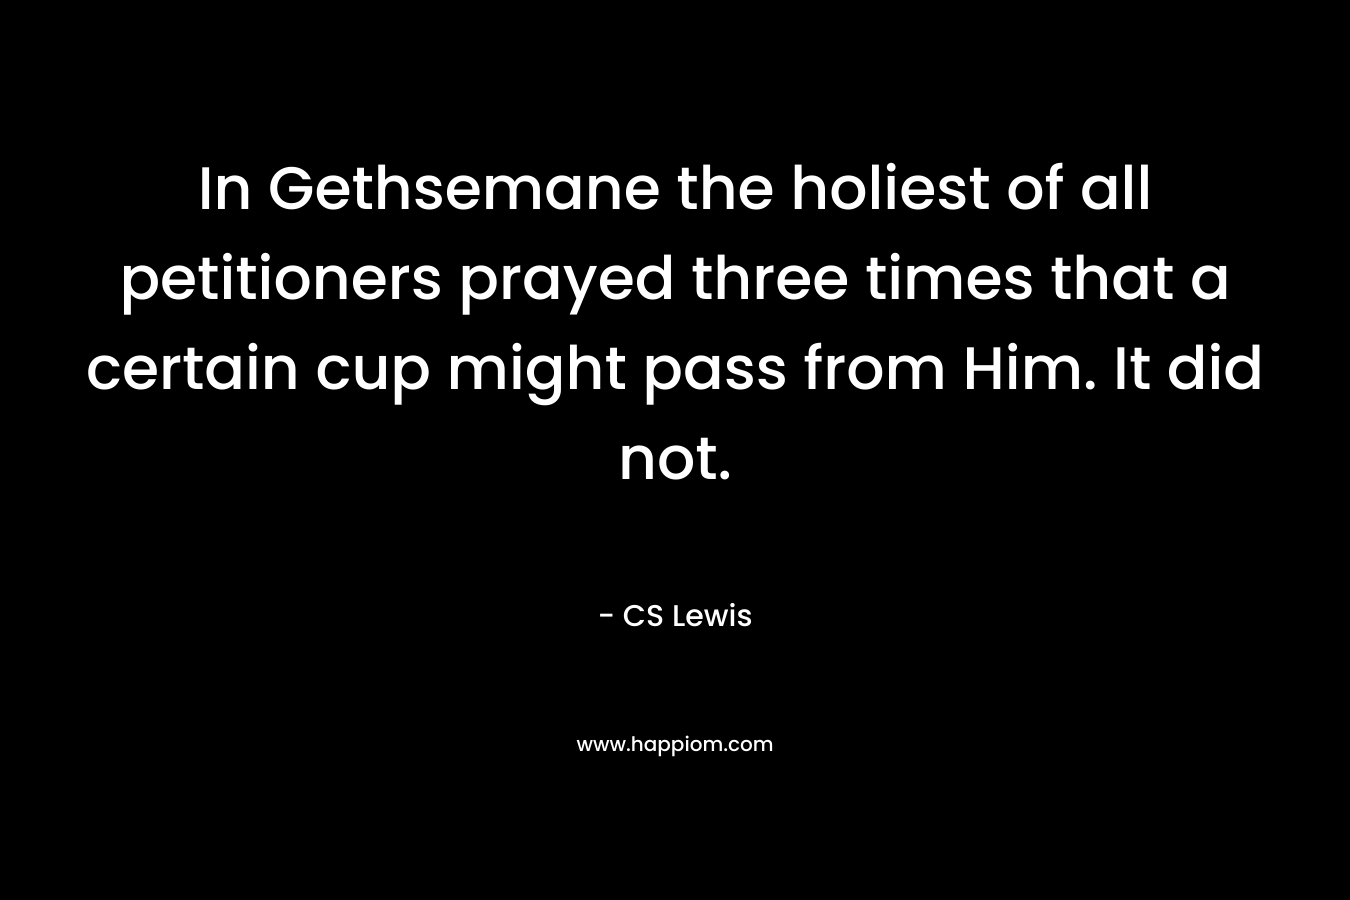 In Gethsemane the holiest of all petitioners prayed three times that a certain cup might pass from Him. It did not. – CS Lewis